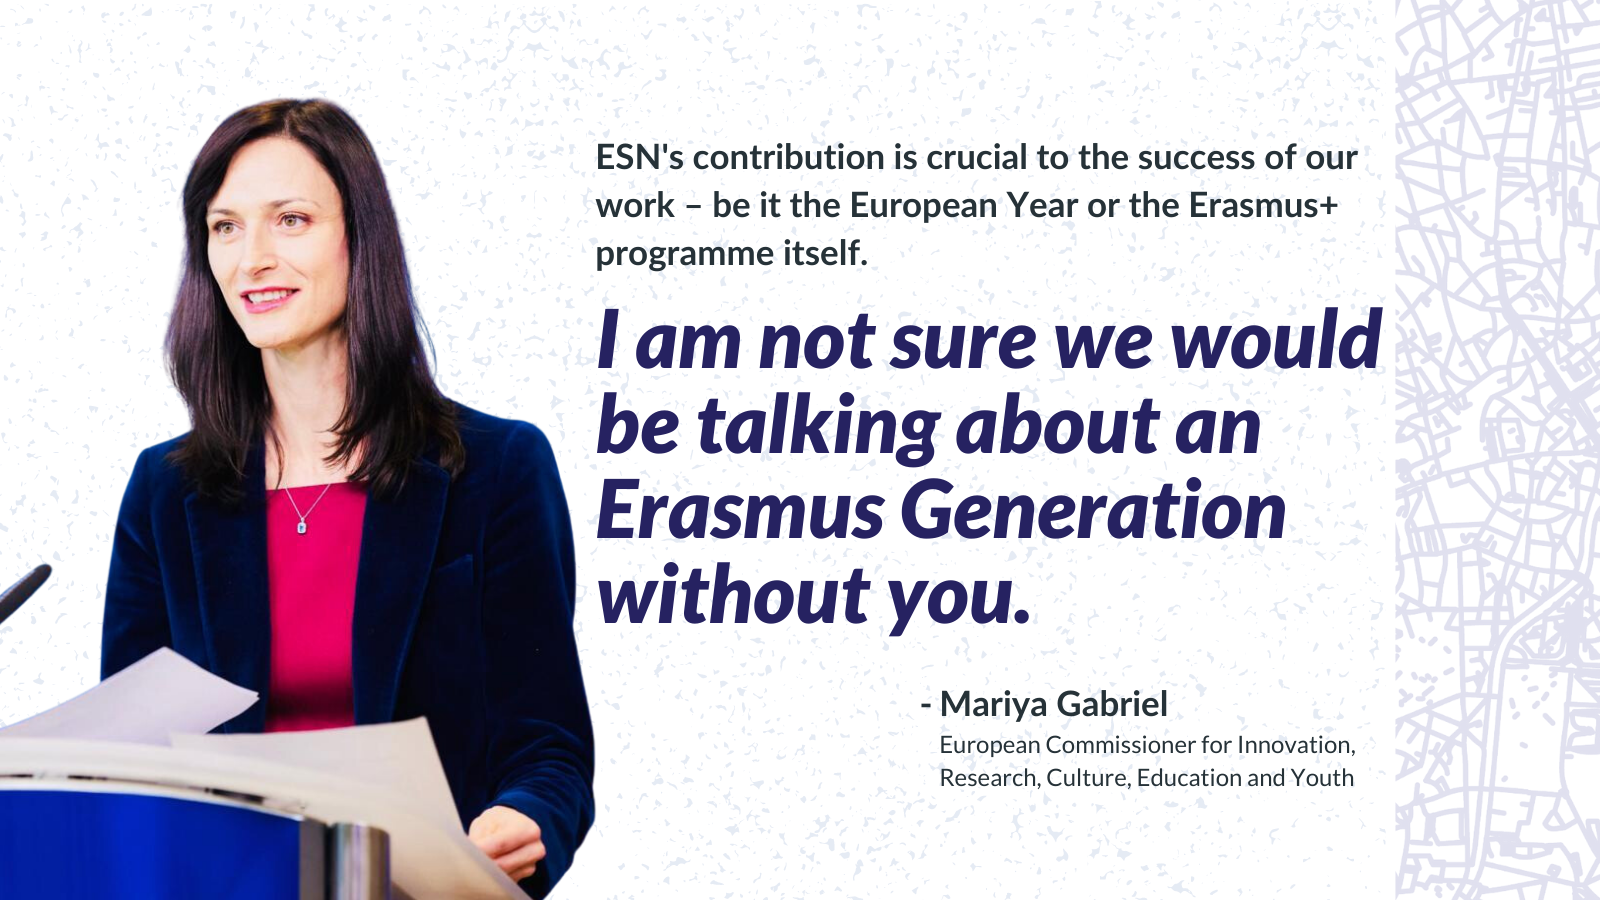 ESN's contribution is crucial to the success of our work – be it the European Year or the Erasmus+ programme itself. I am not sure we would be talking about an Erasmus Generation without you.